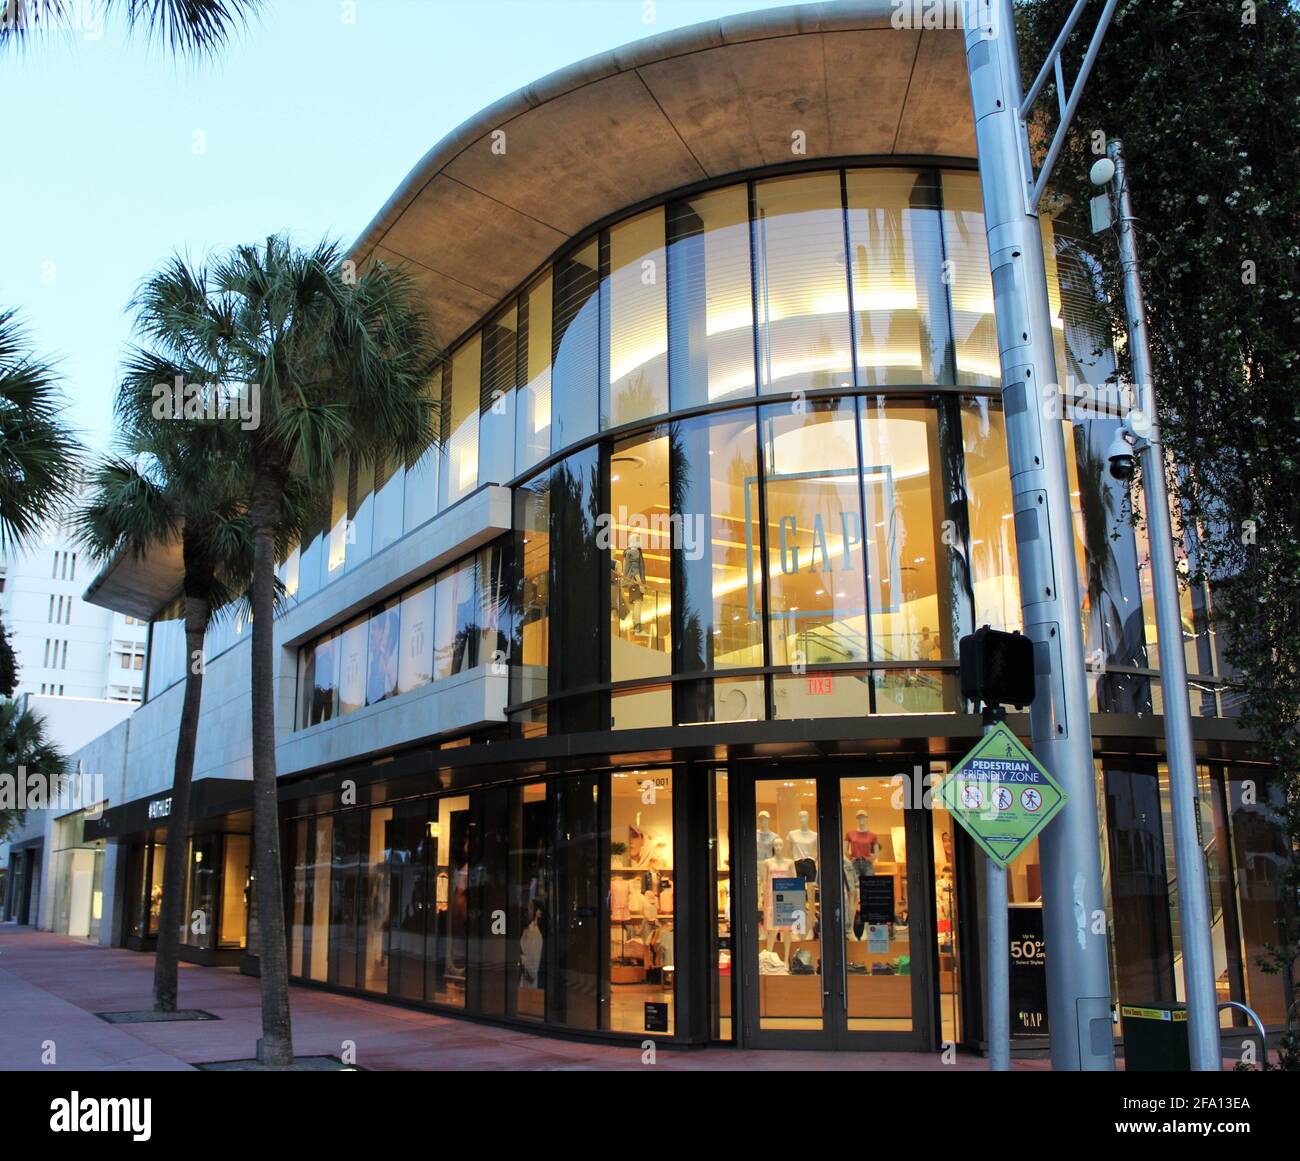 The GAP store at Lincoln Road Mall at sunrise. The Gap, Inc., commonly known as Gap Inc. is an American worldwide clothing and accessories retailer. Stock Photo